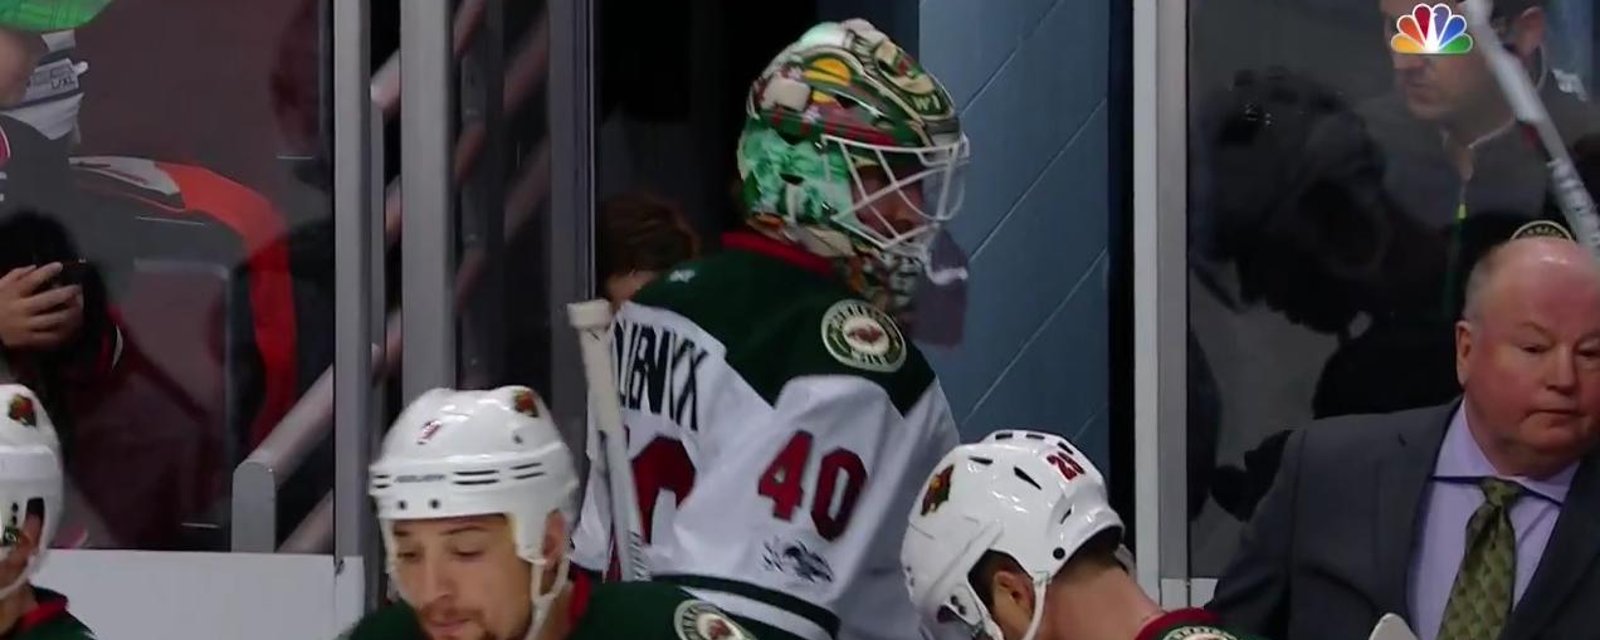 Misunderstanding about Dubnyk's exit had people scratching their heads. 